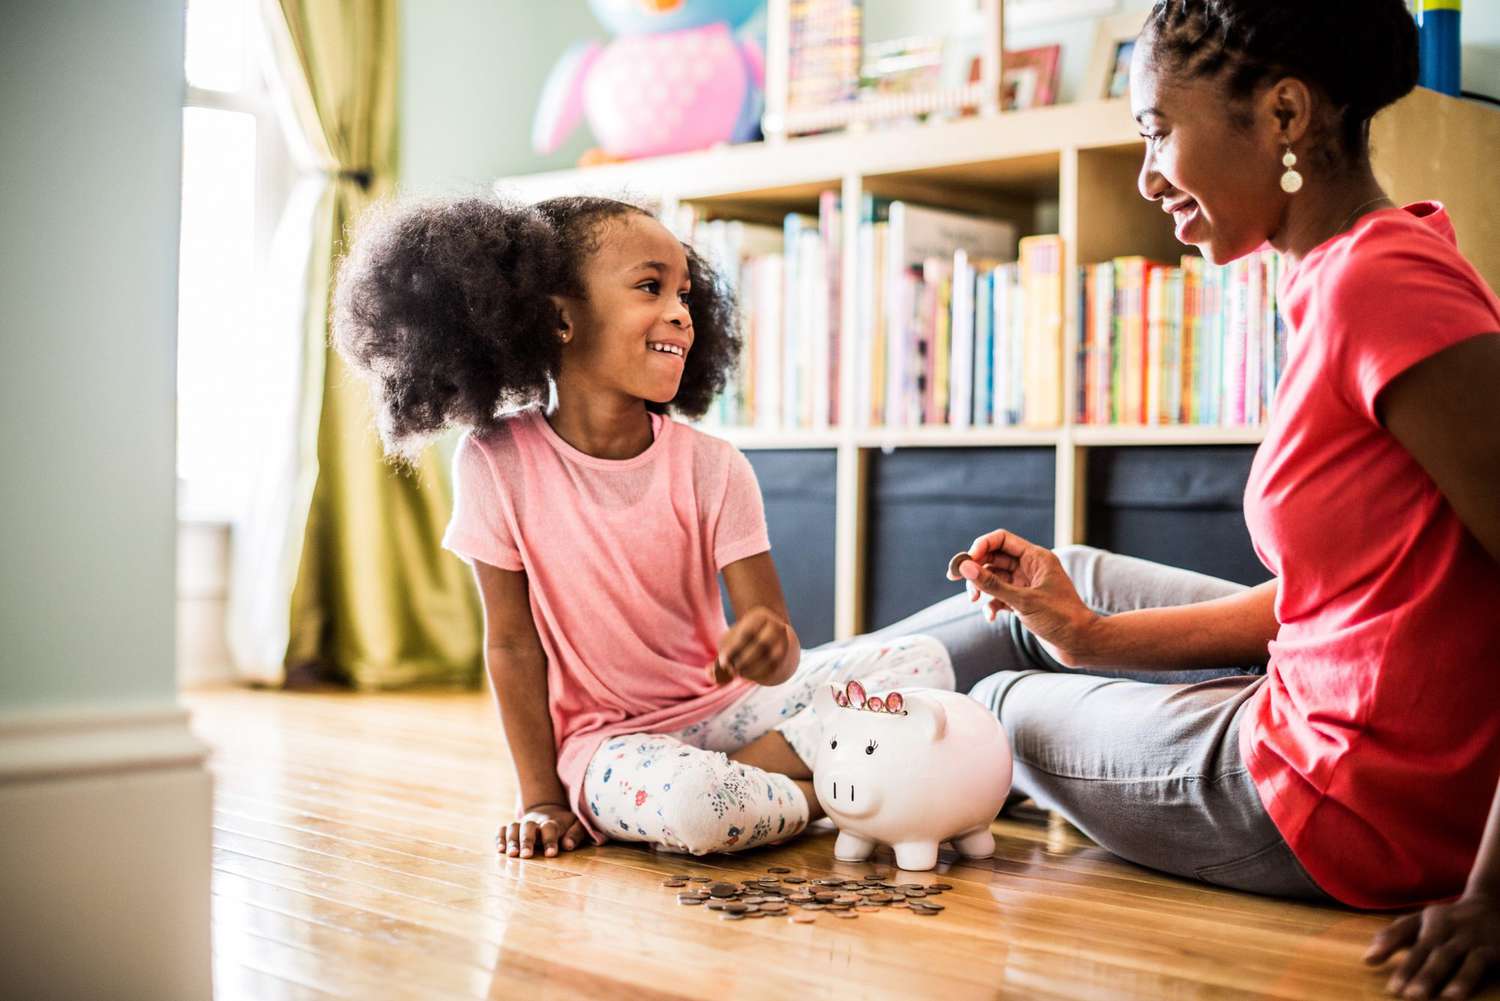 An image of a mother and daughter with a piggy bank.